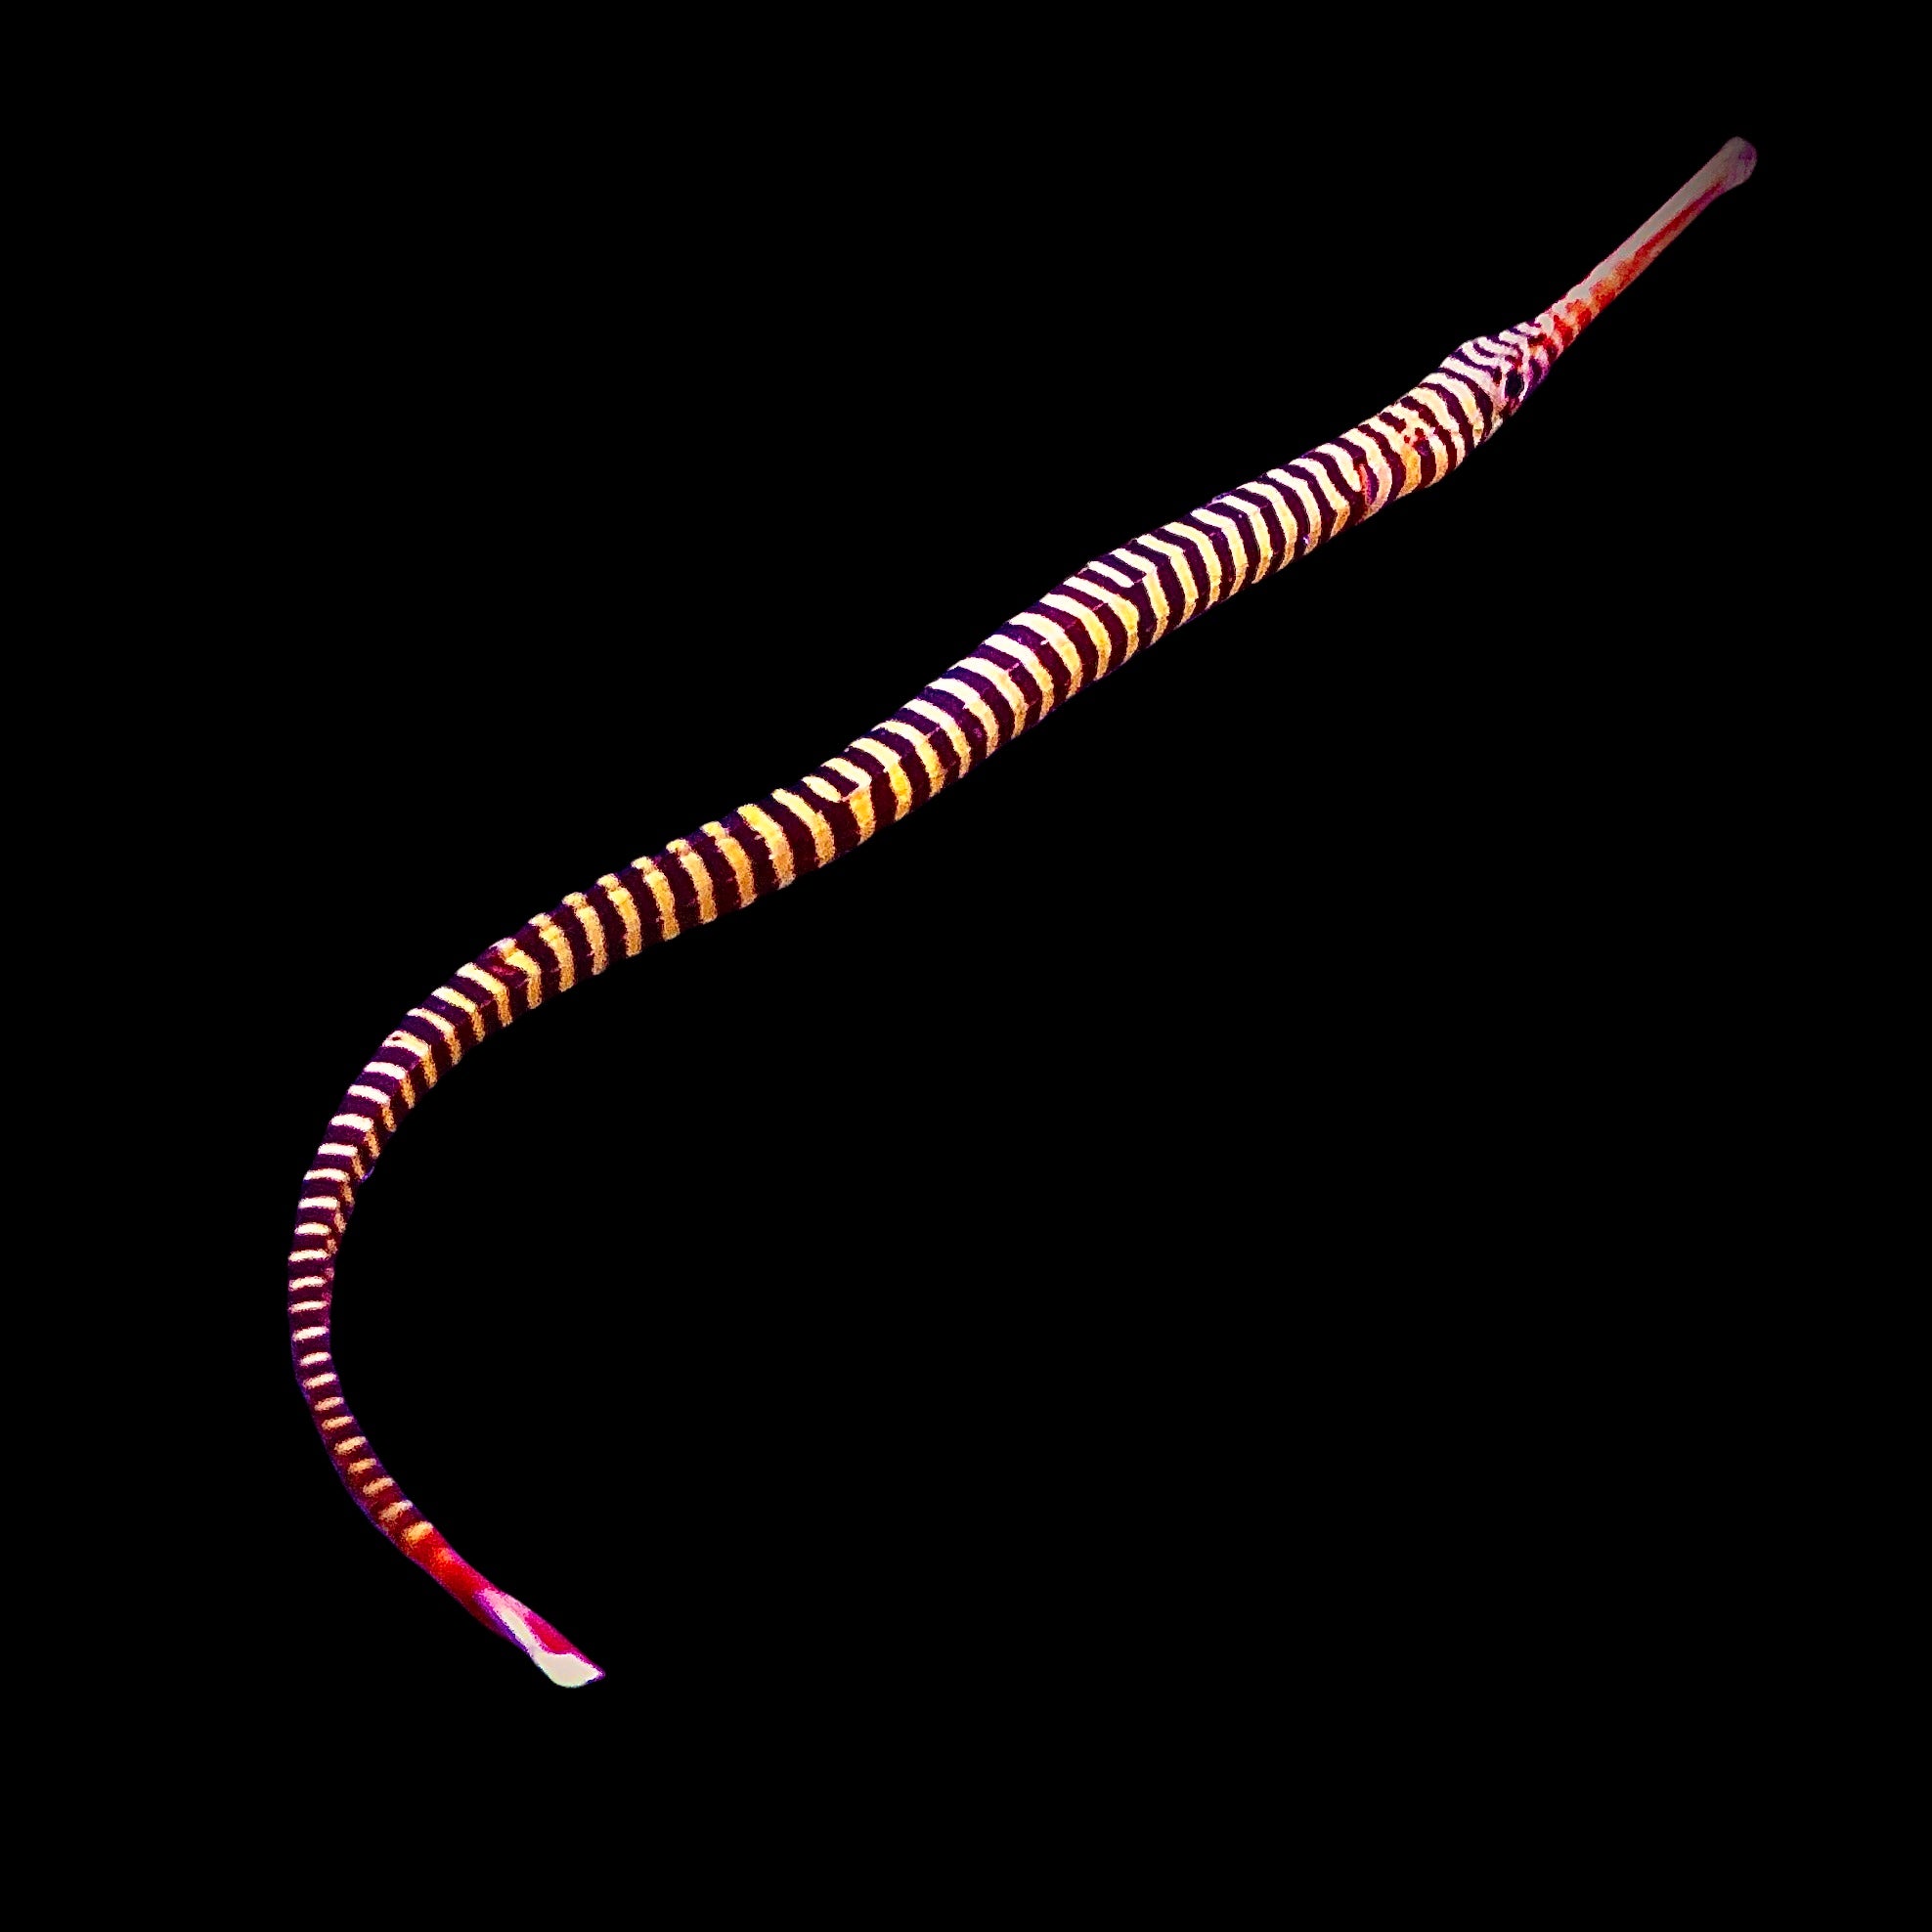 SPECIAL-Aquarium Conditioned-Many Banded Pipefish